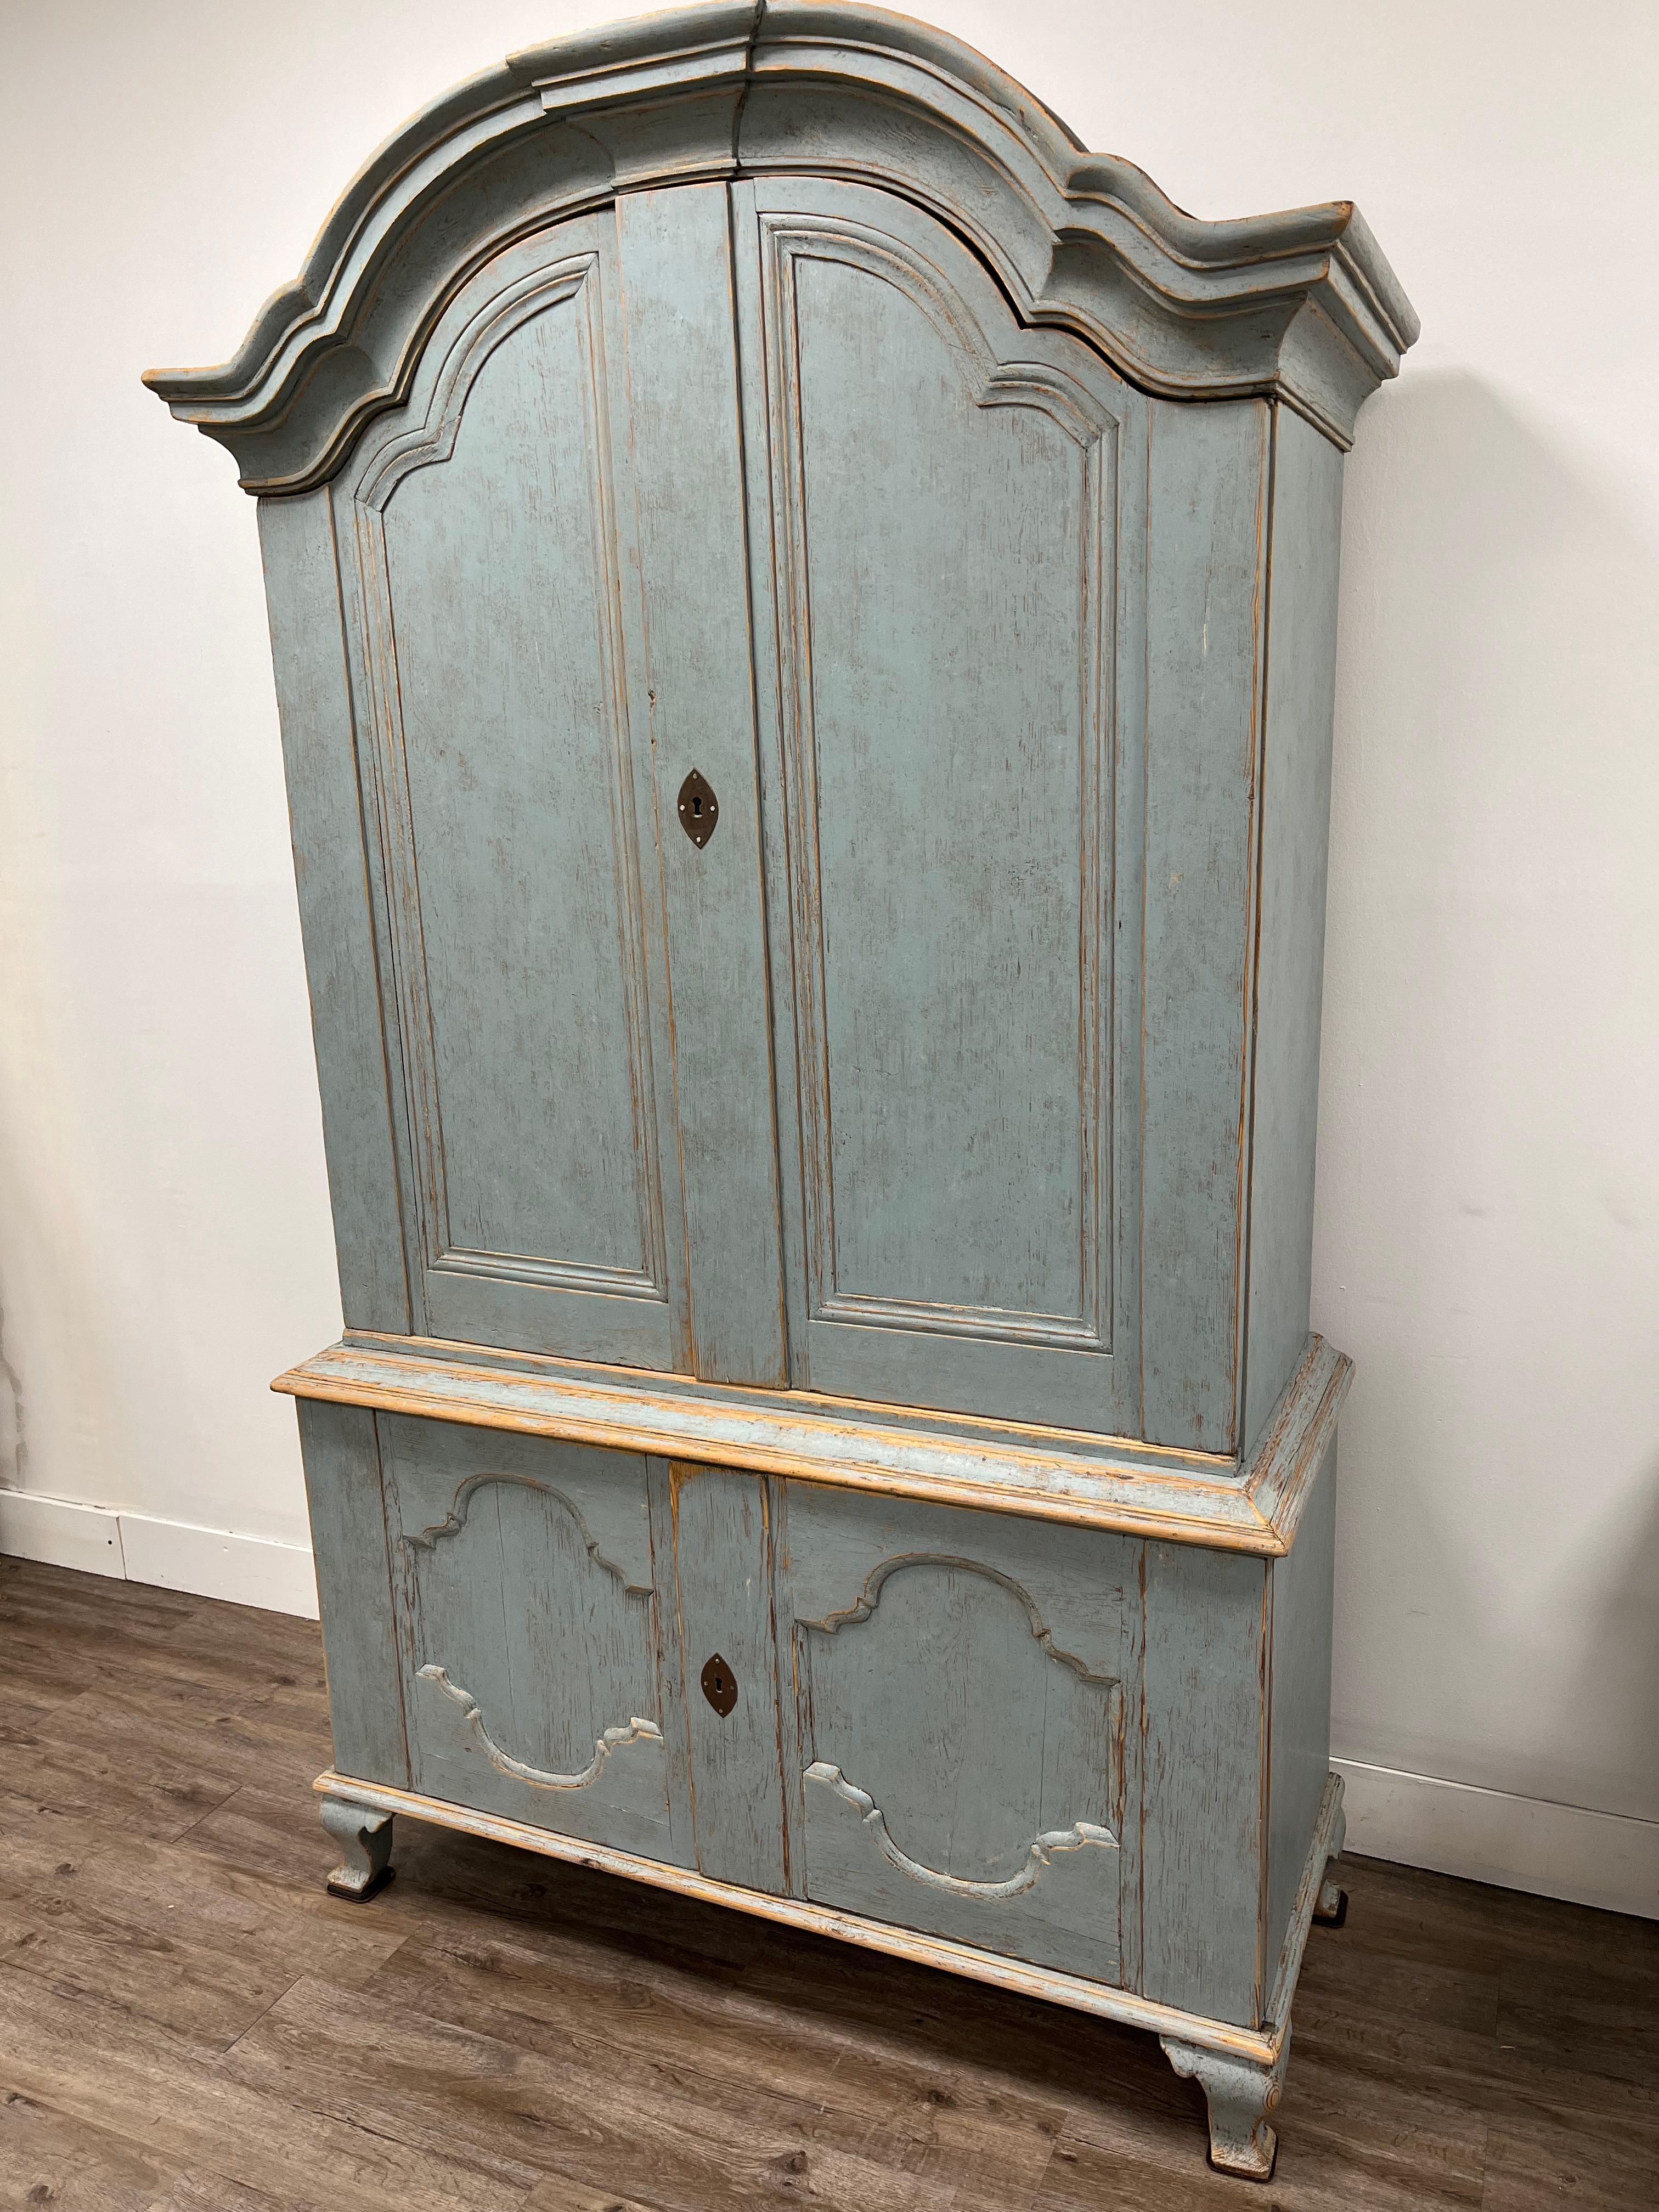 A Swedish Rococo cabinet from Varmland. The bonnet top consists of an impressive overhanging arched pediment cornice. Upper section has four shelves and five small drawers (with simple pulls) located between the second and third shelves. Lower